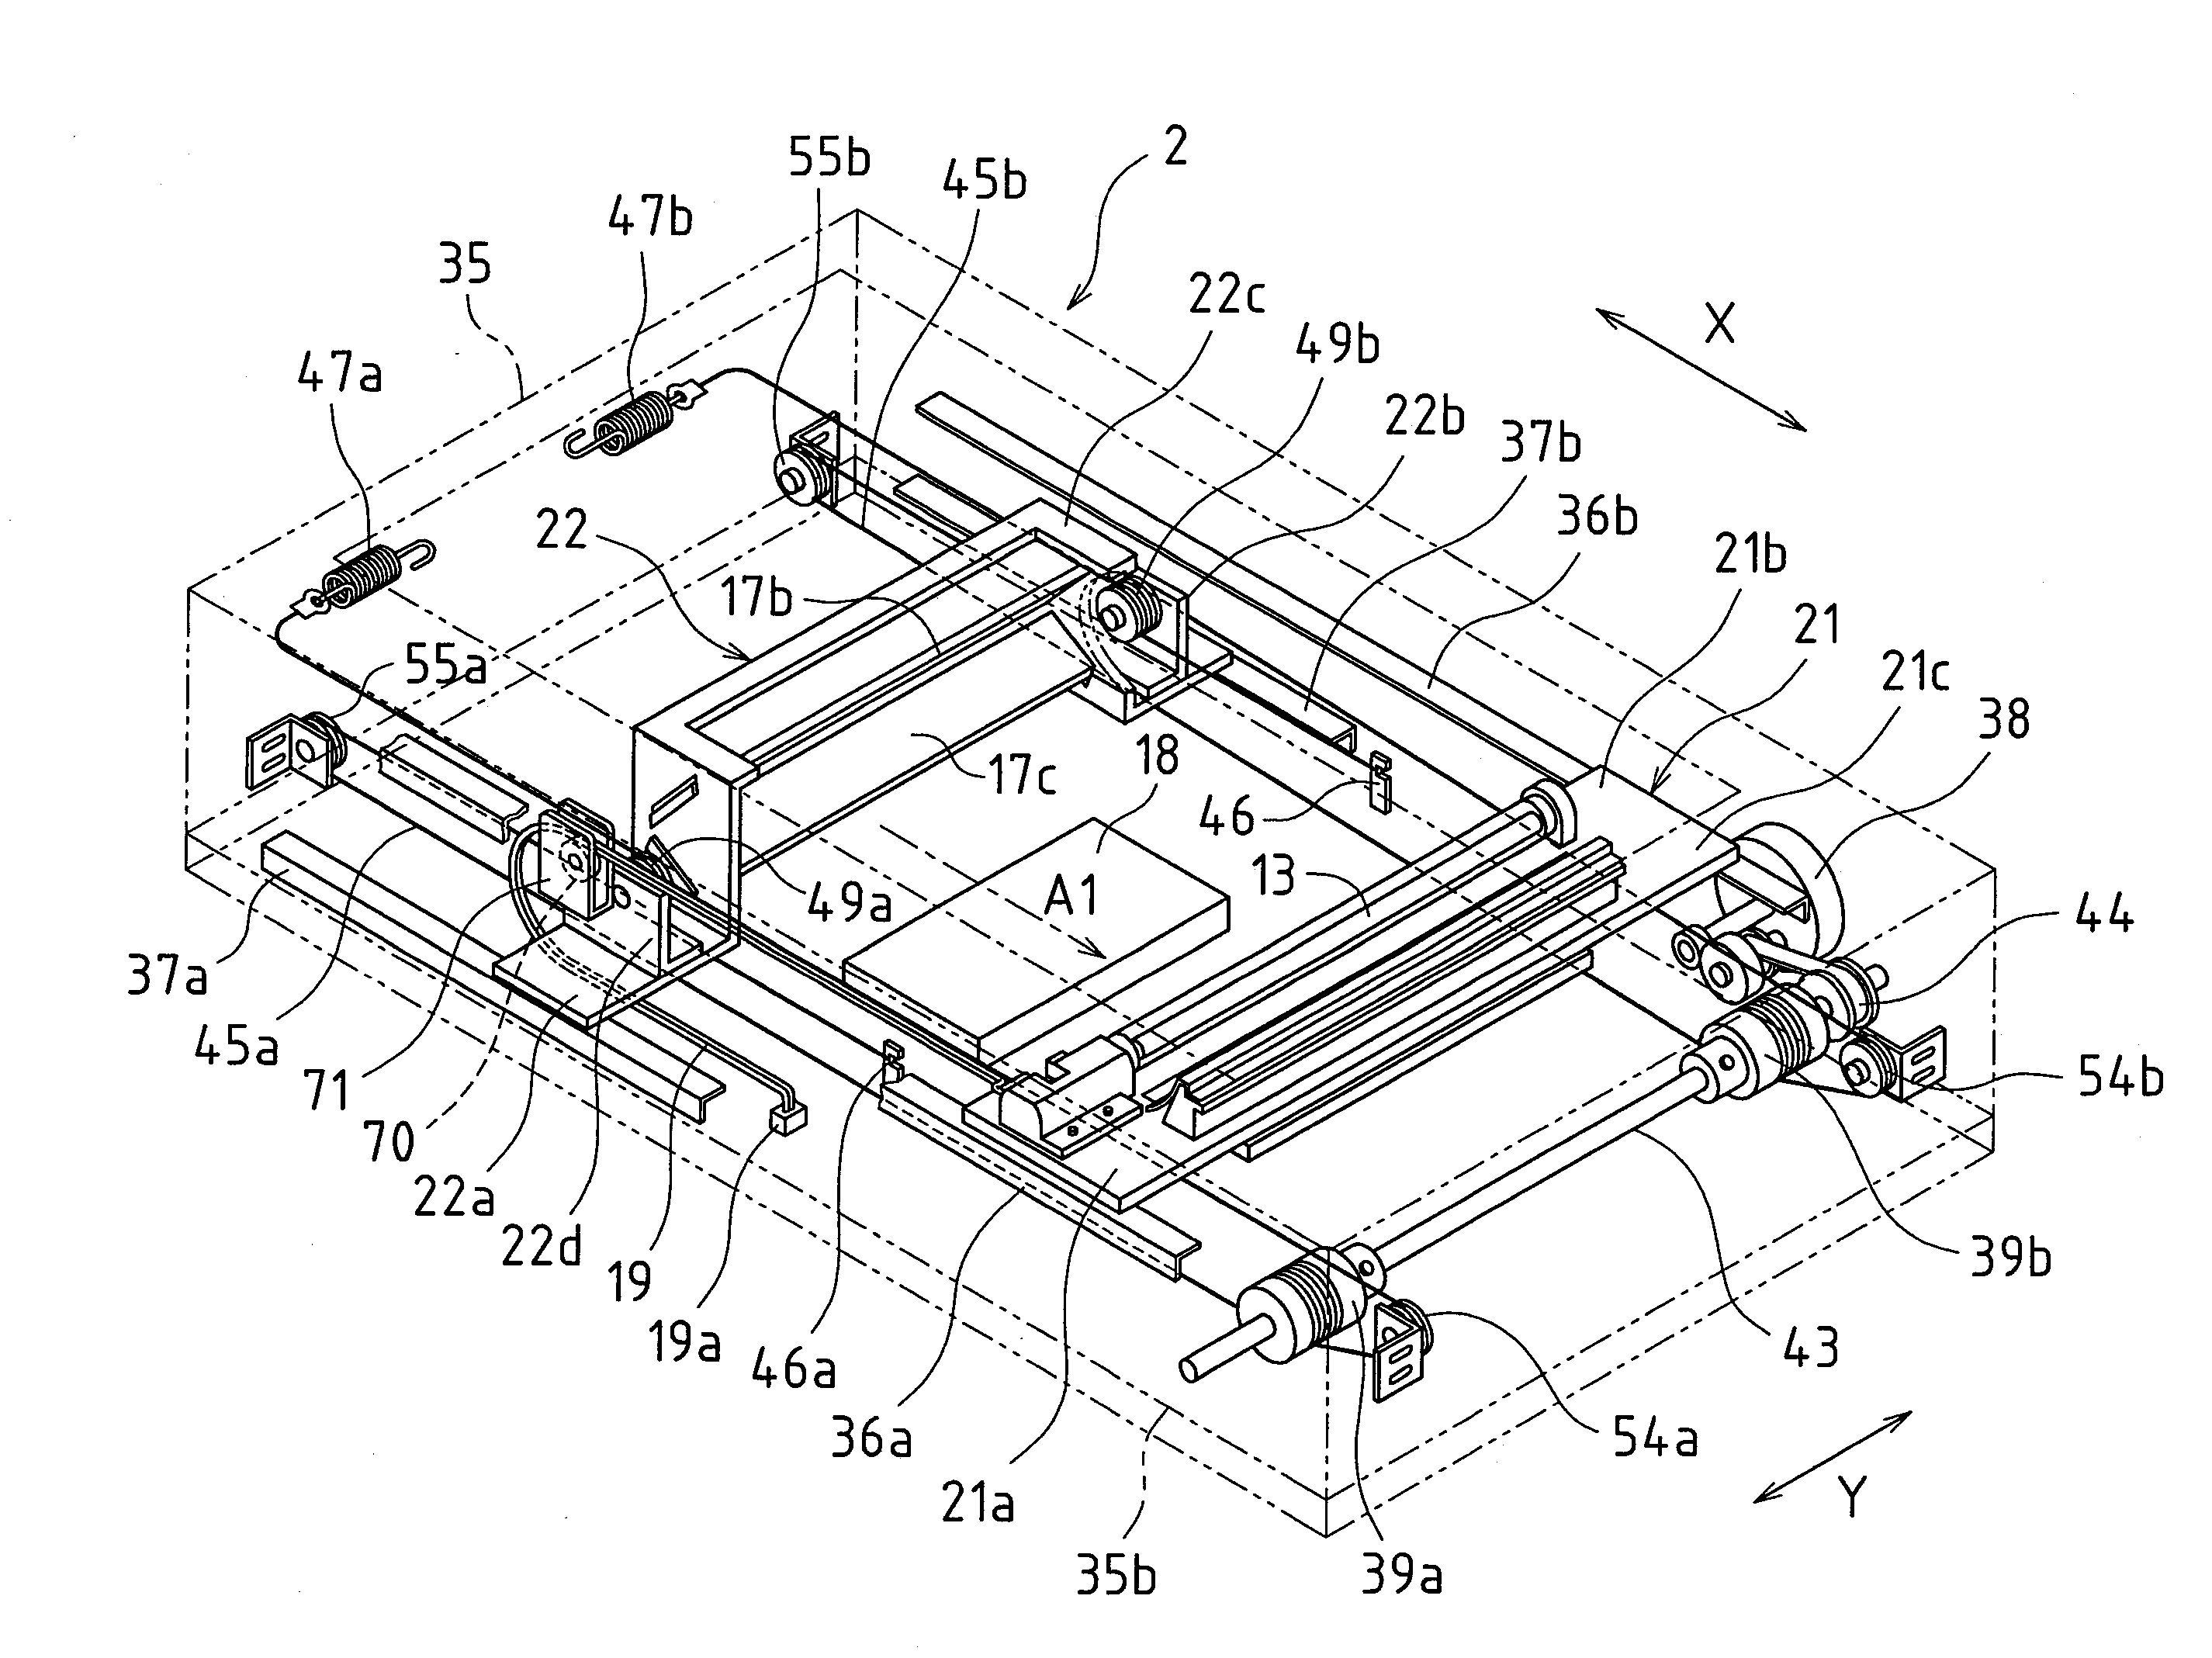 Structure supporting distribution cable of document reading apparatus